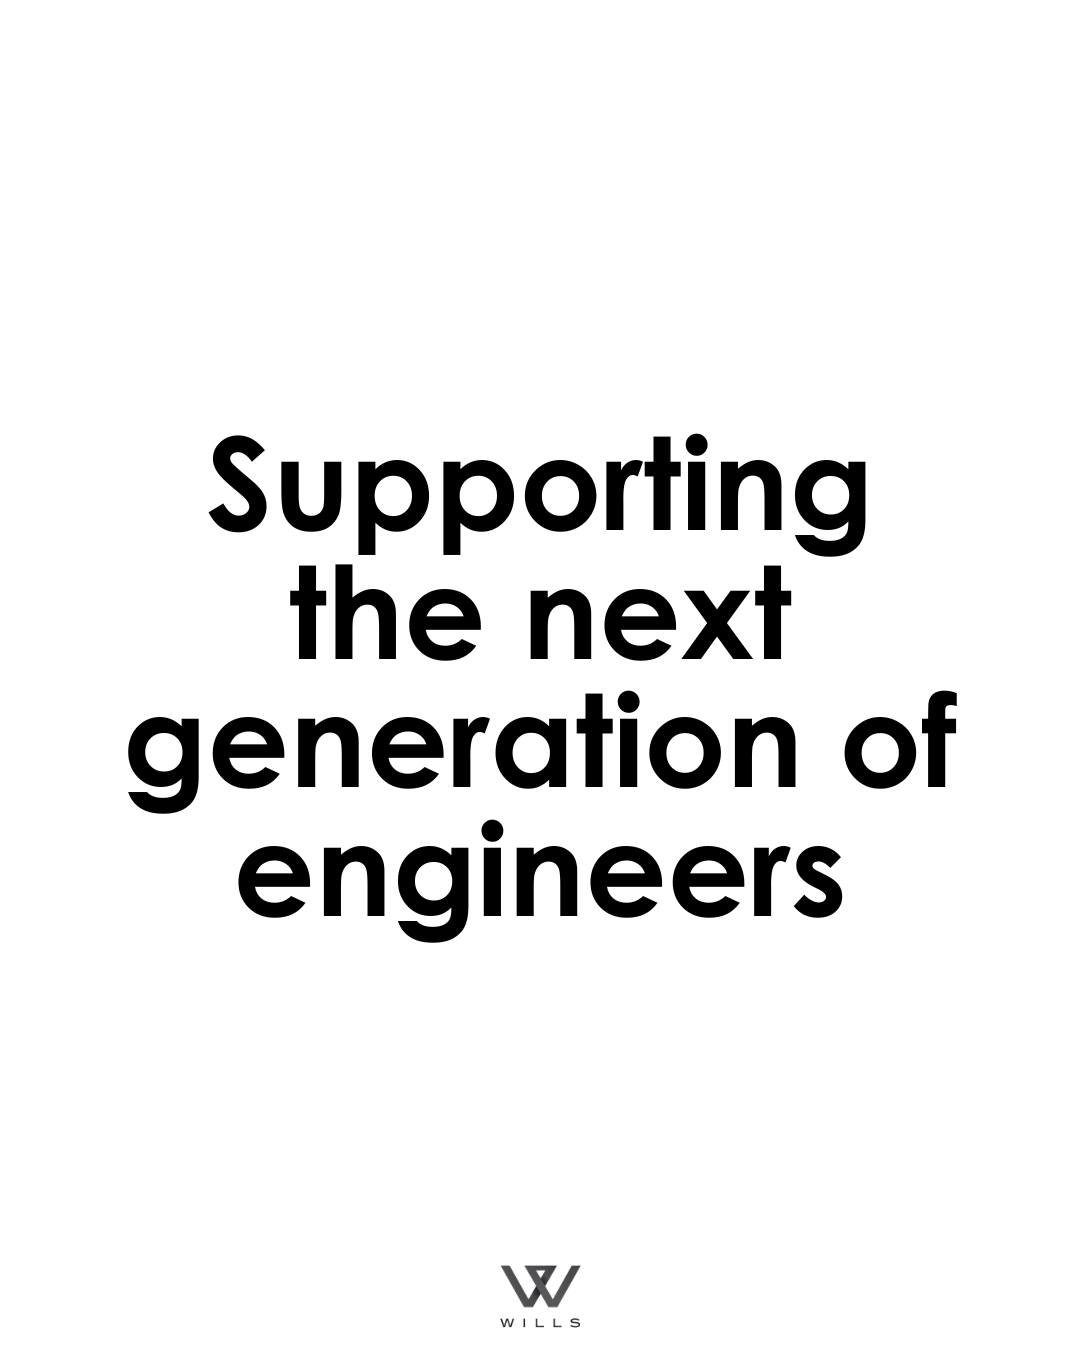 We know how important it is to support the future industry leaders and are honoured to support a variety of student-focused initiatives, including: 

Sponsoring Queens Science Formal
Sponsoring National Engineering Month Engineering Challenge
Sponsor